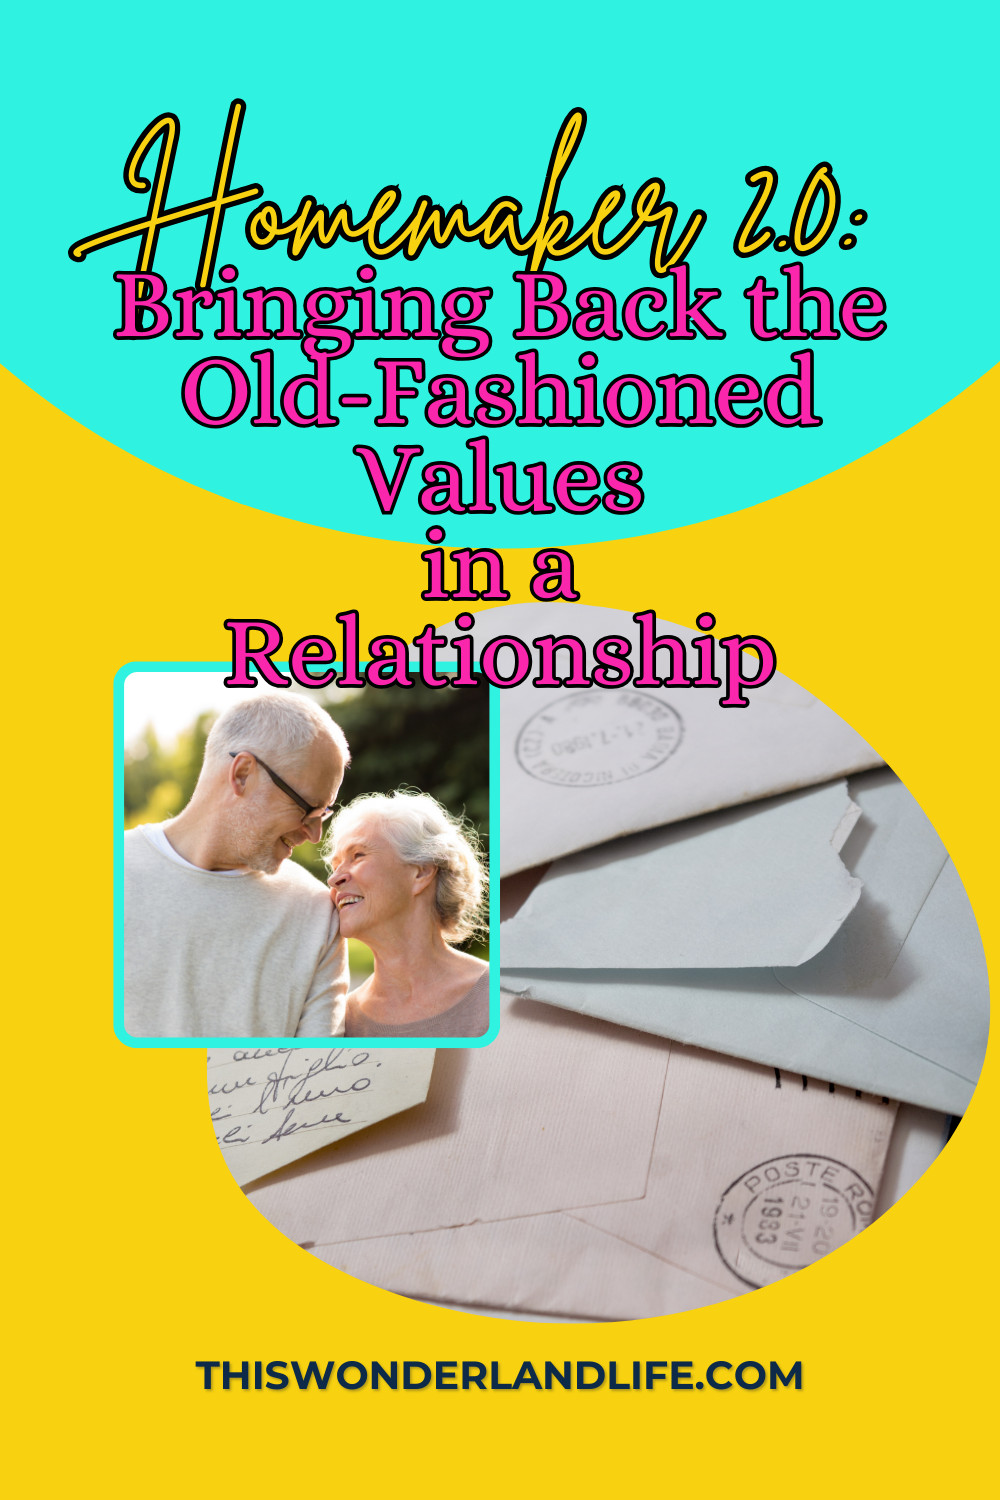 Homemaker 2.0: Bringing Back the Old-Fashioned Values in a Relationship